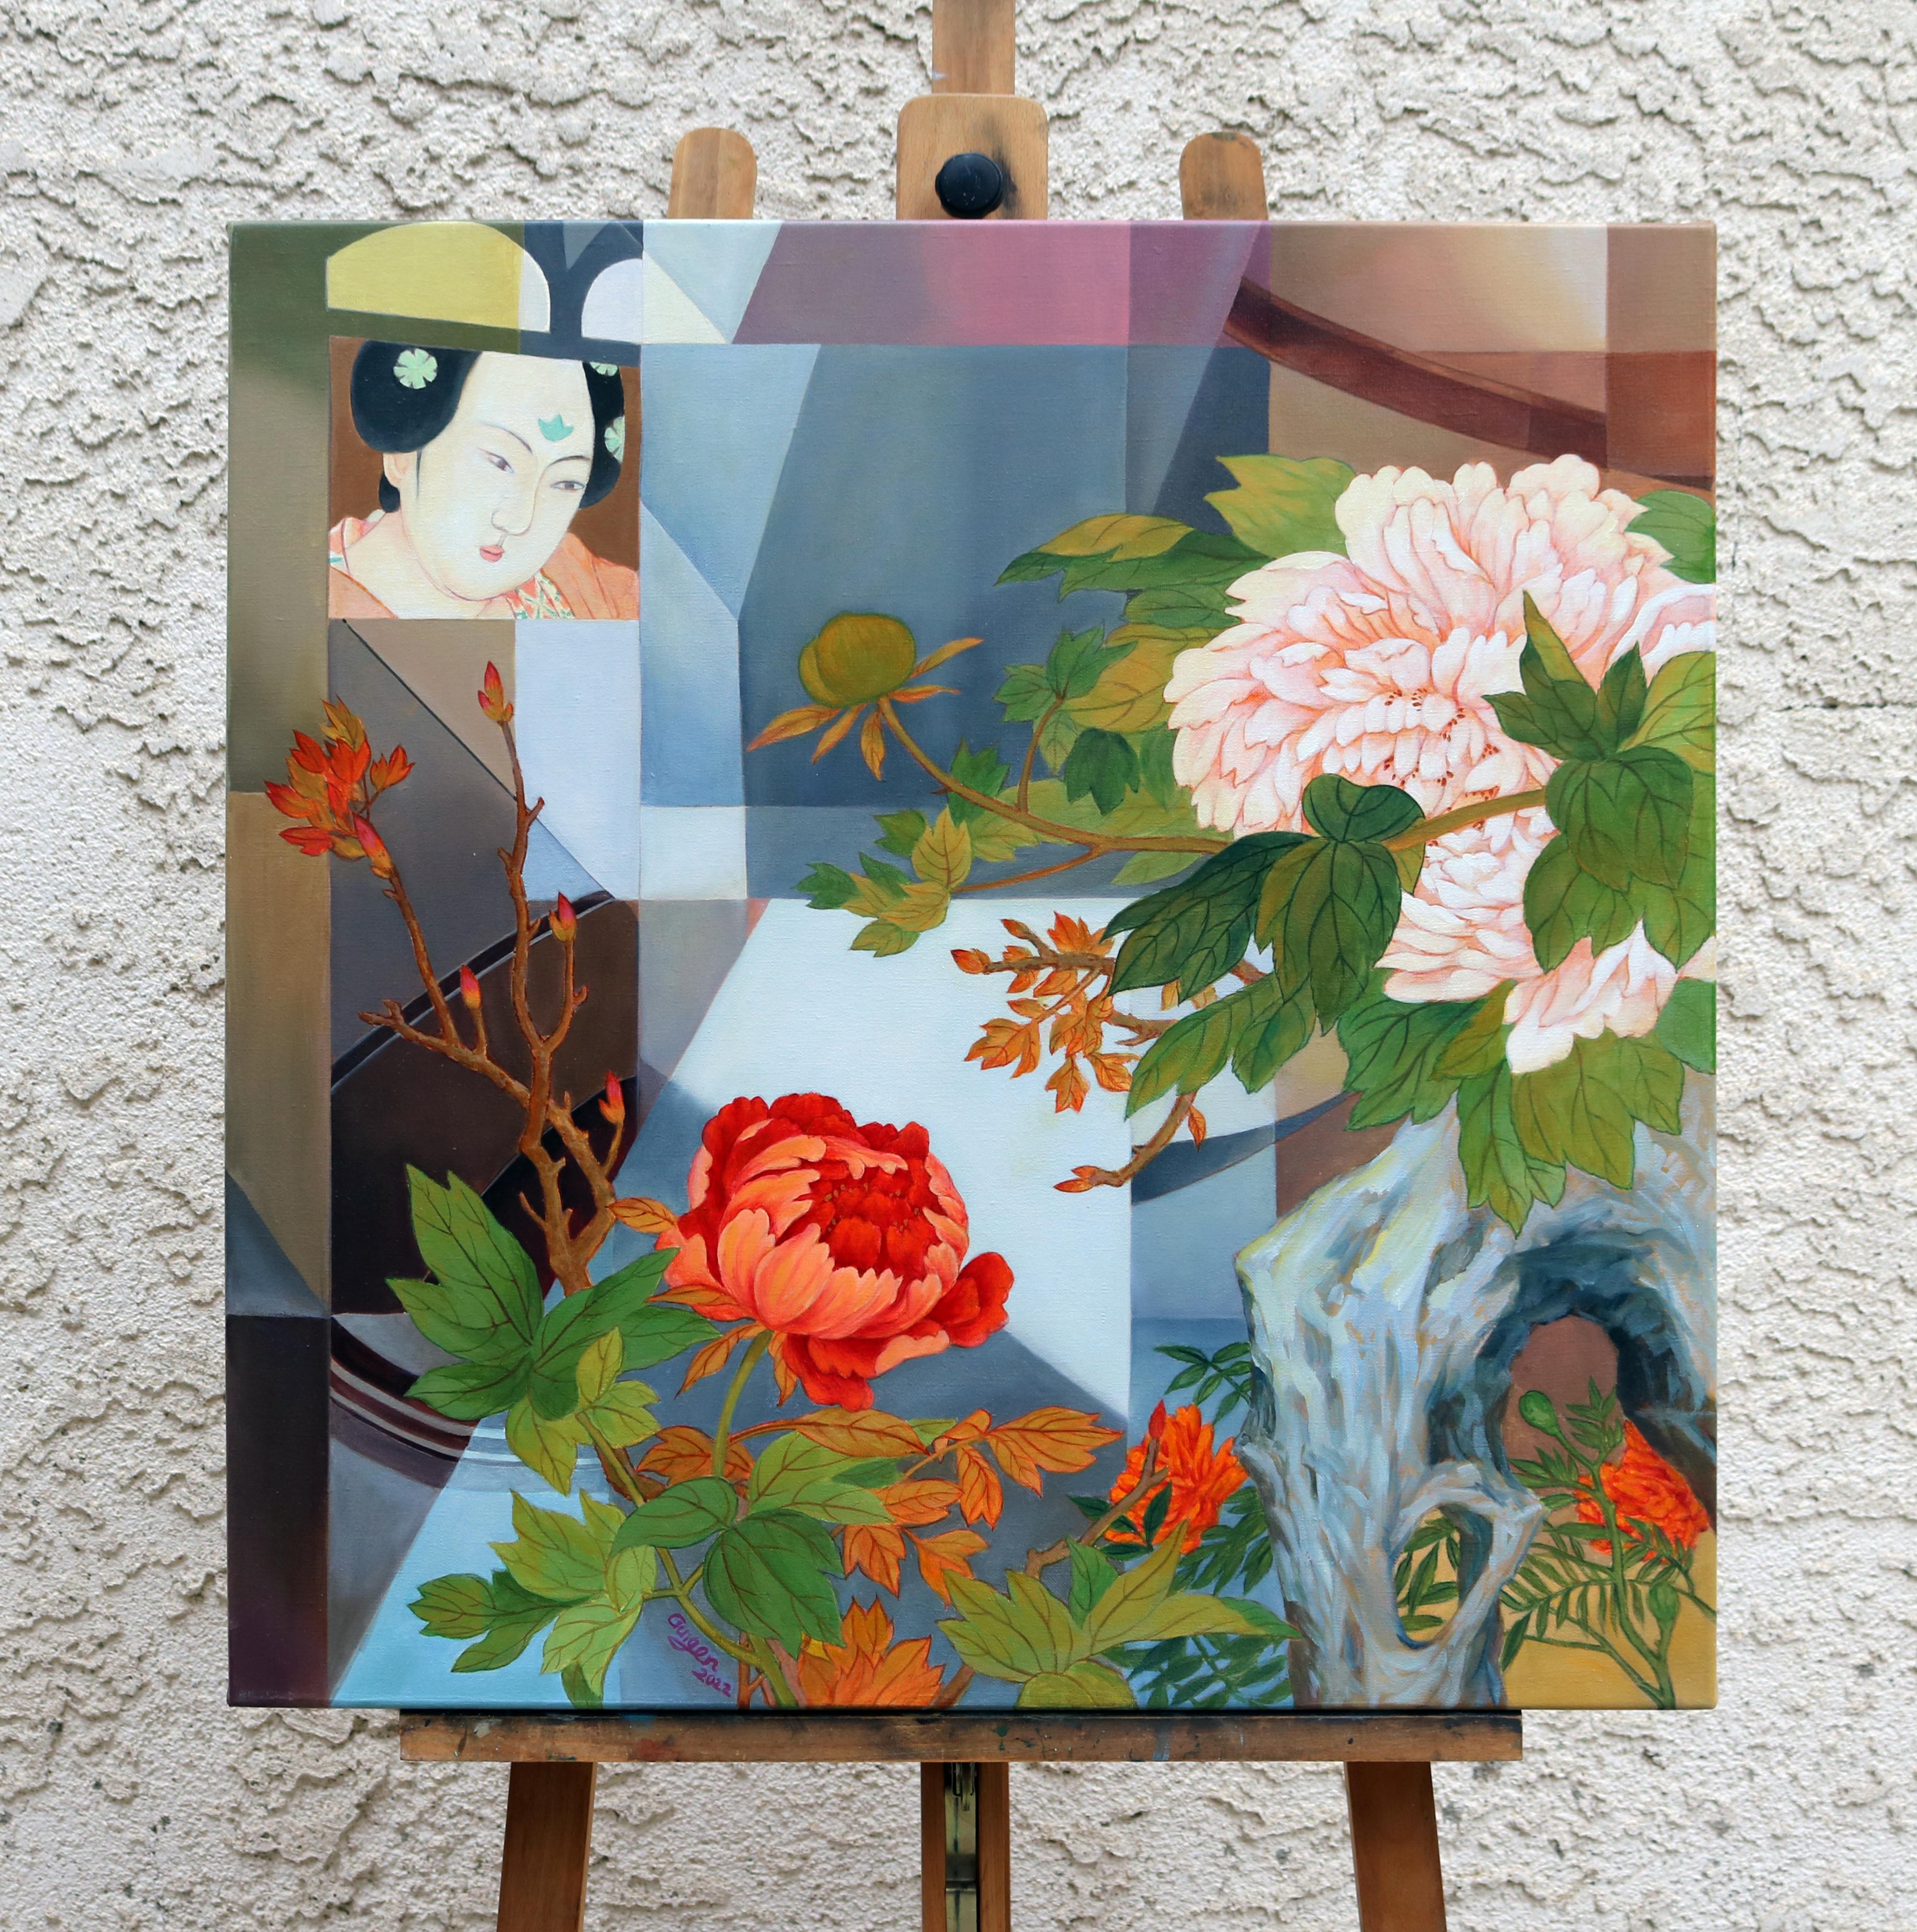 <p>Artist Comments<br>Artist Guigen Zha paints a contemporary piece by combining Chinese art with a geometric landscape. A lady wearing a traditional hanfu observes the other elements of the composition. In the corners, red and pink peonies grow in